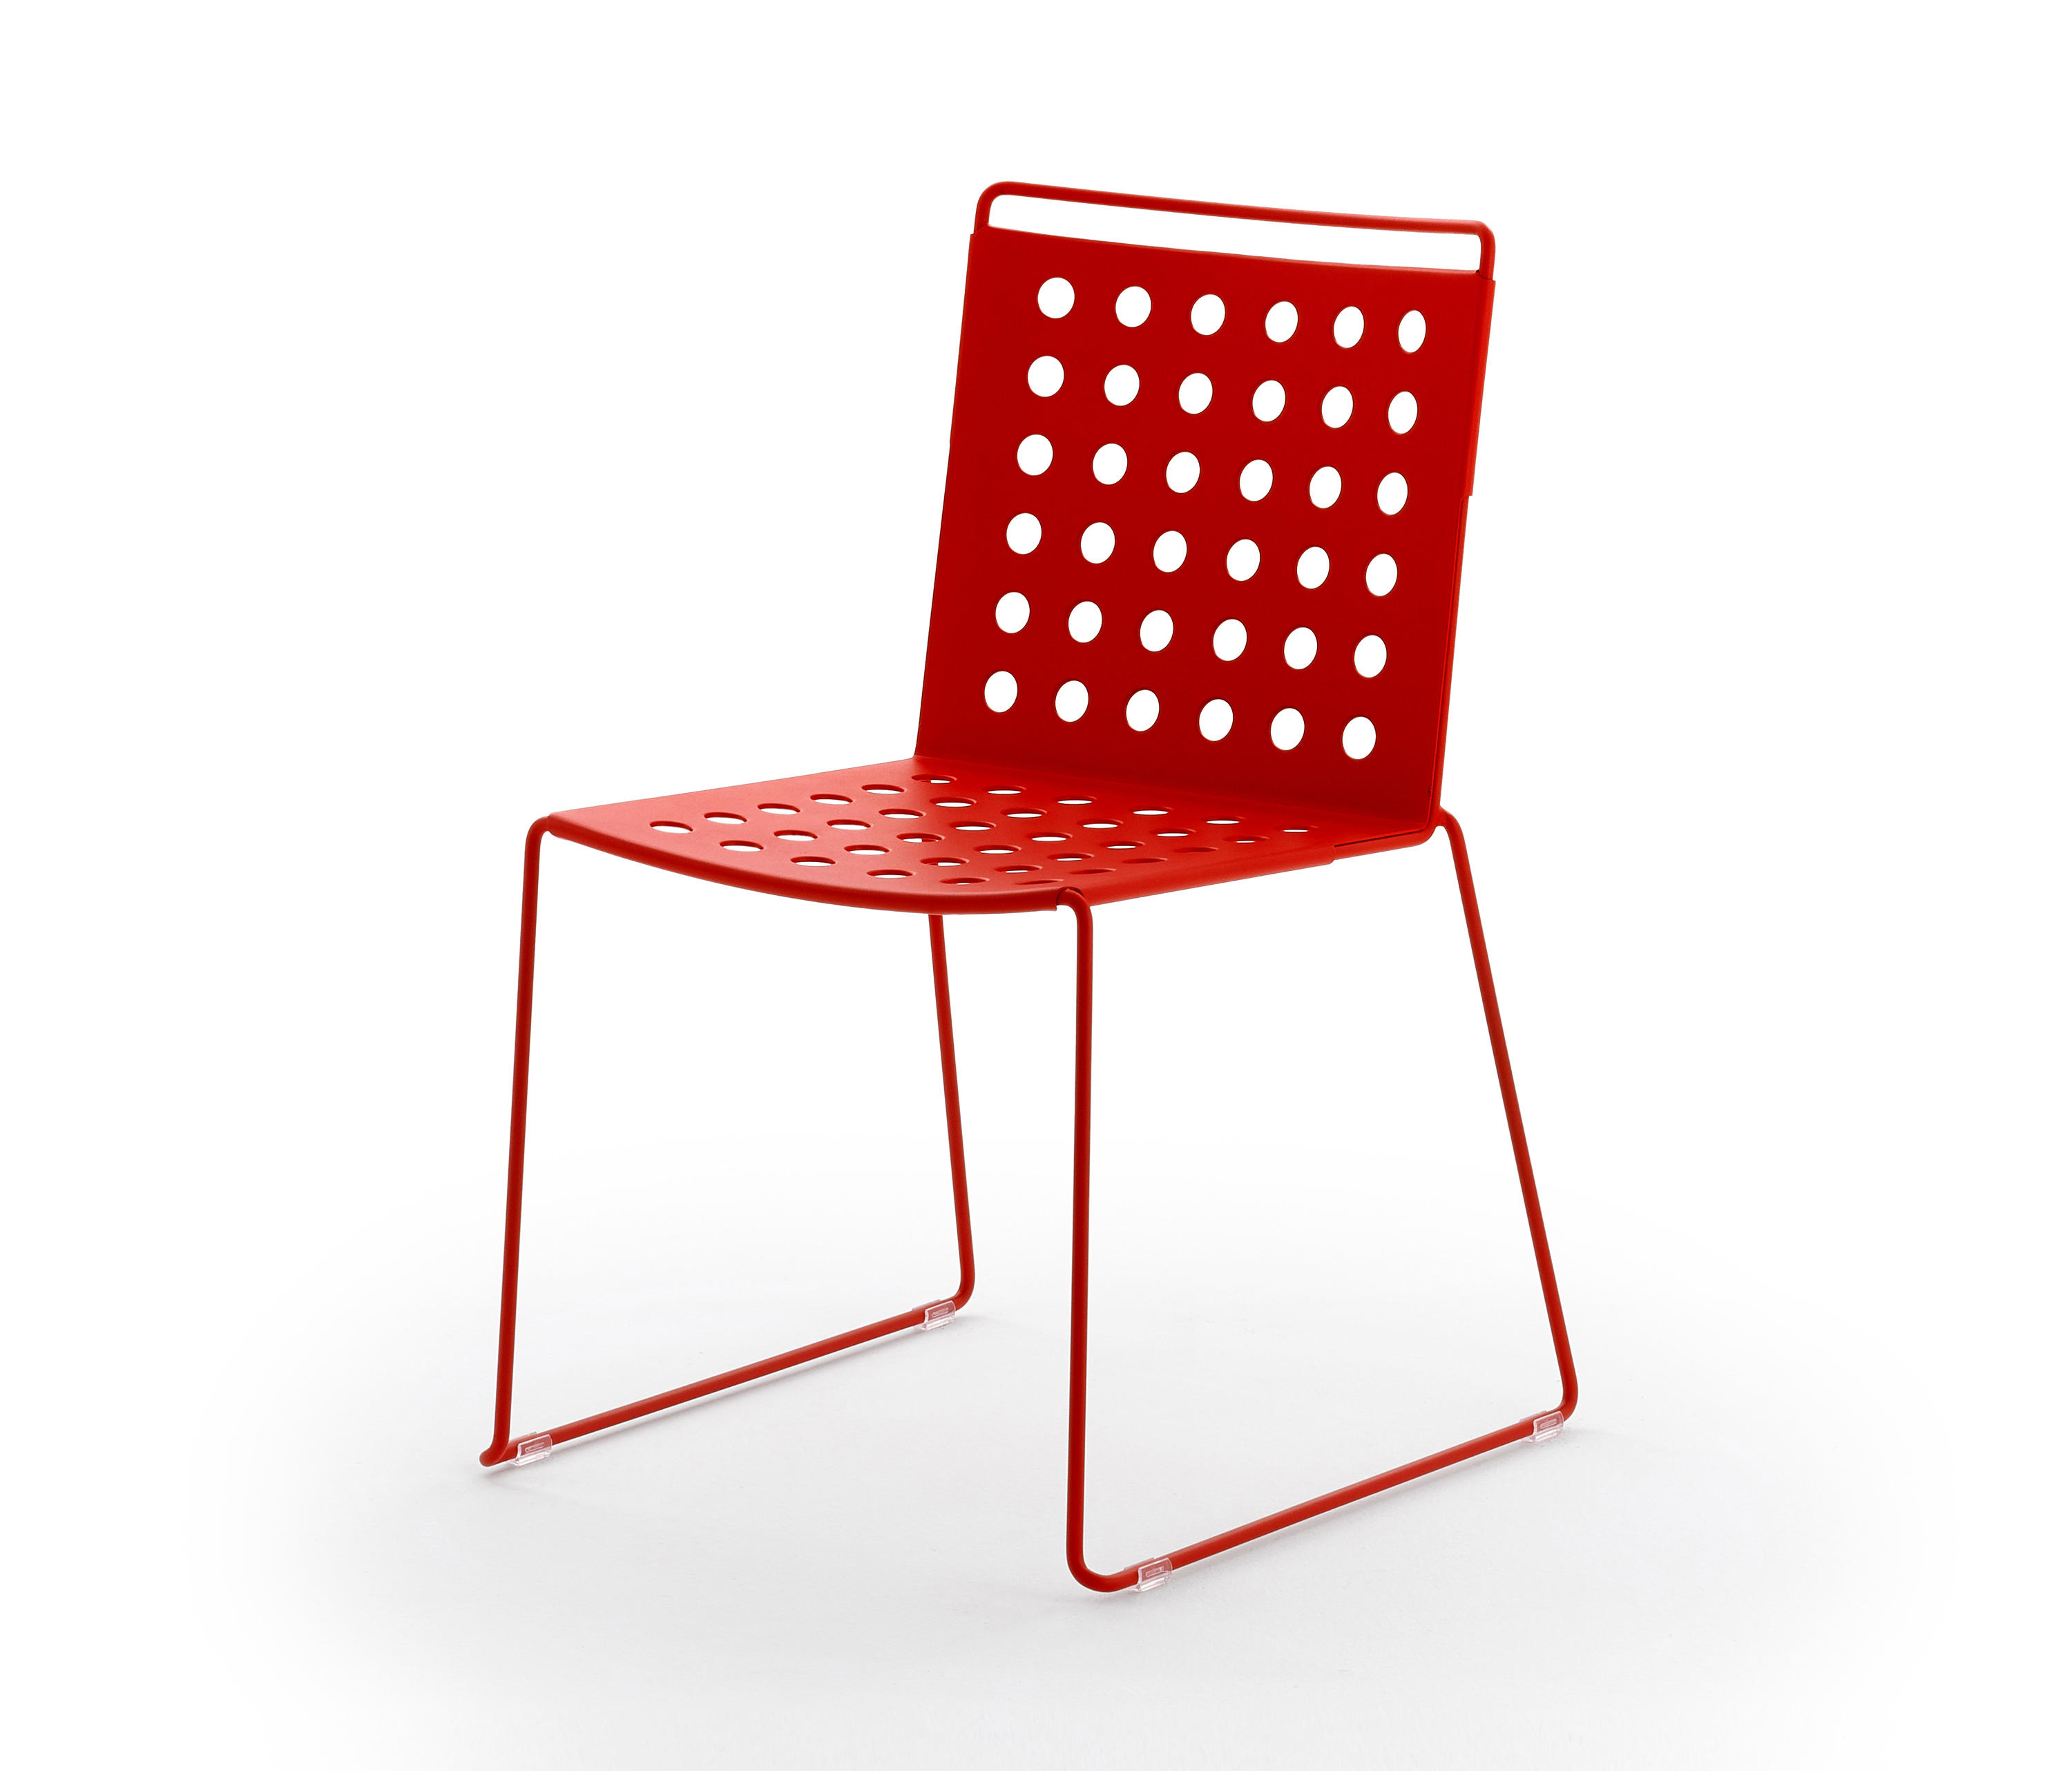 BUSY CHAIR - Chairs from Urbantime | Architonic